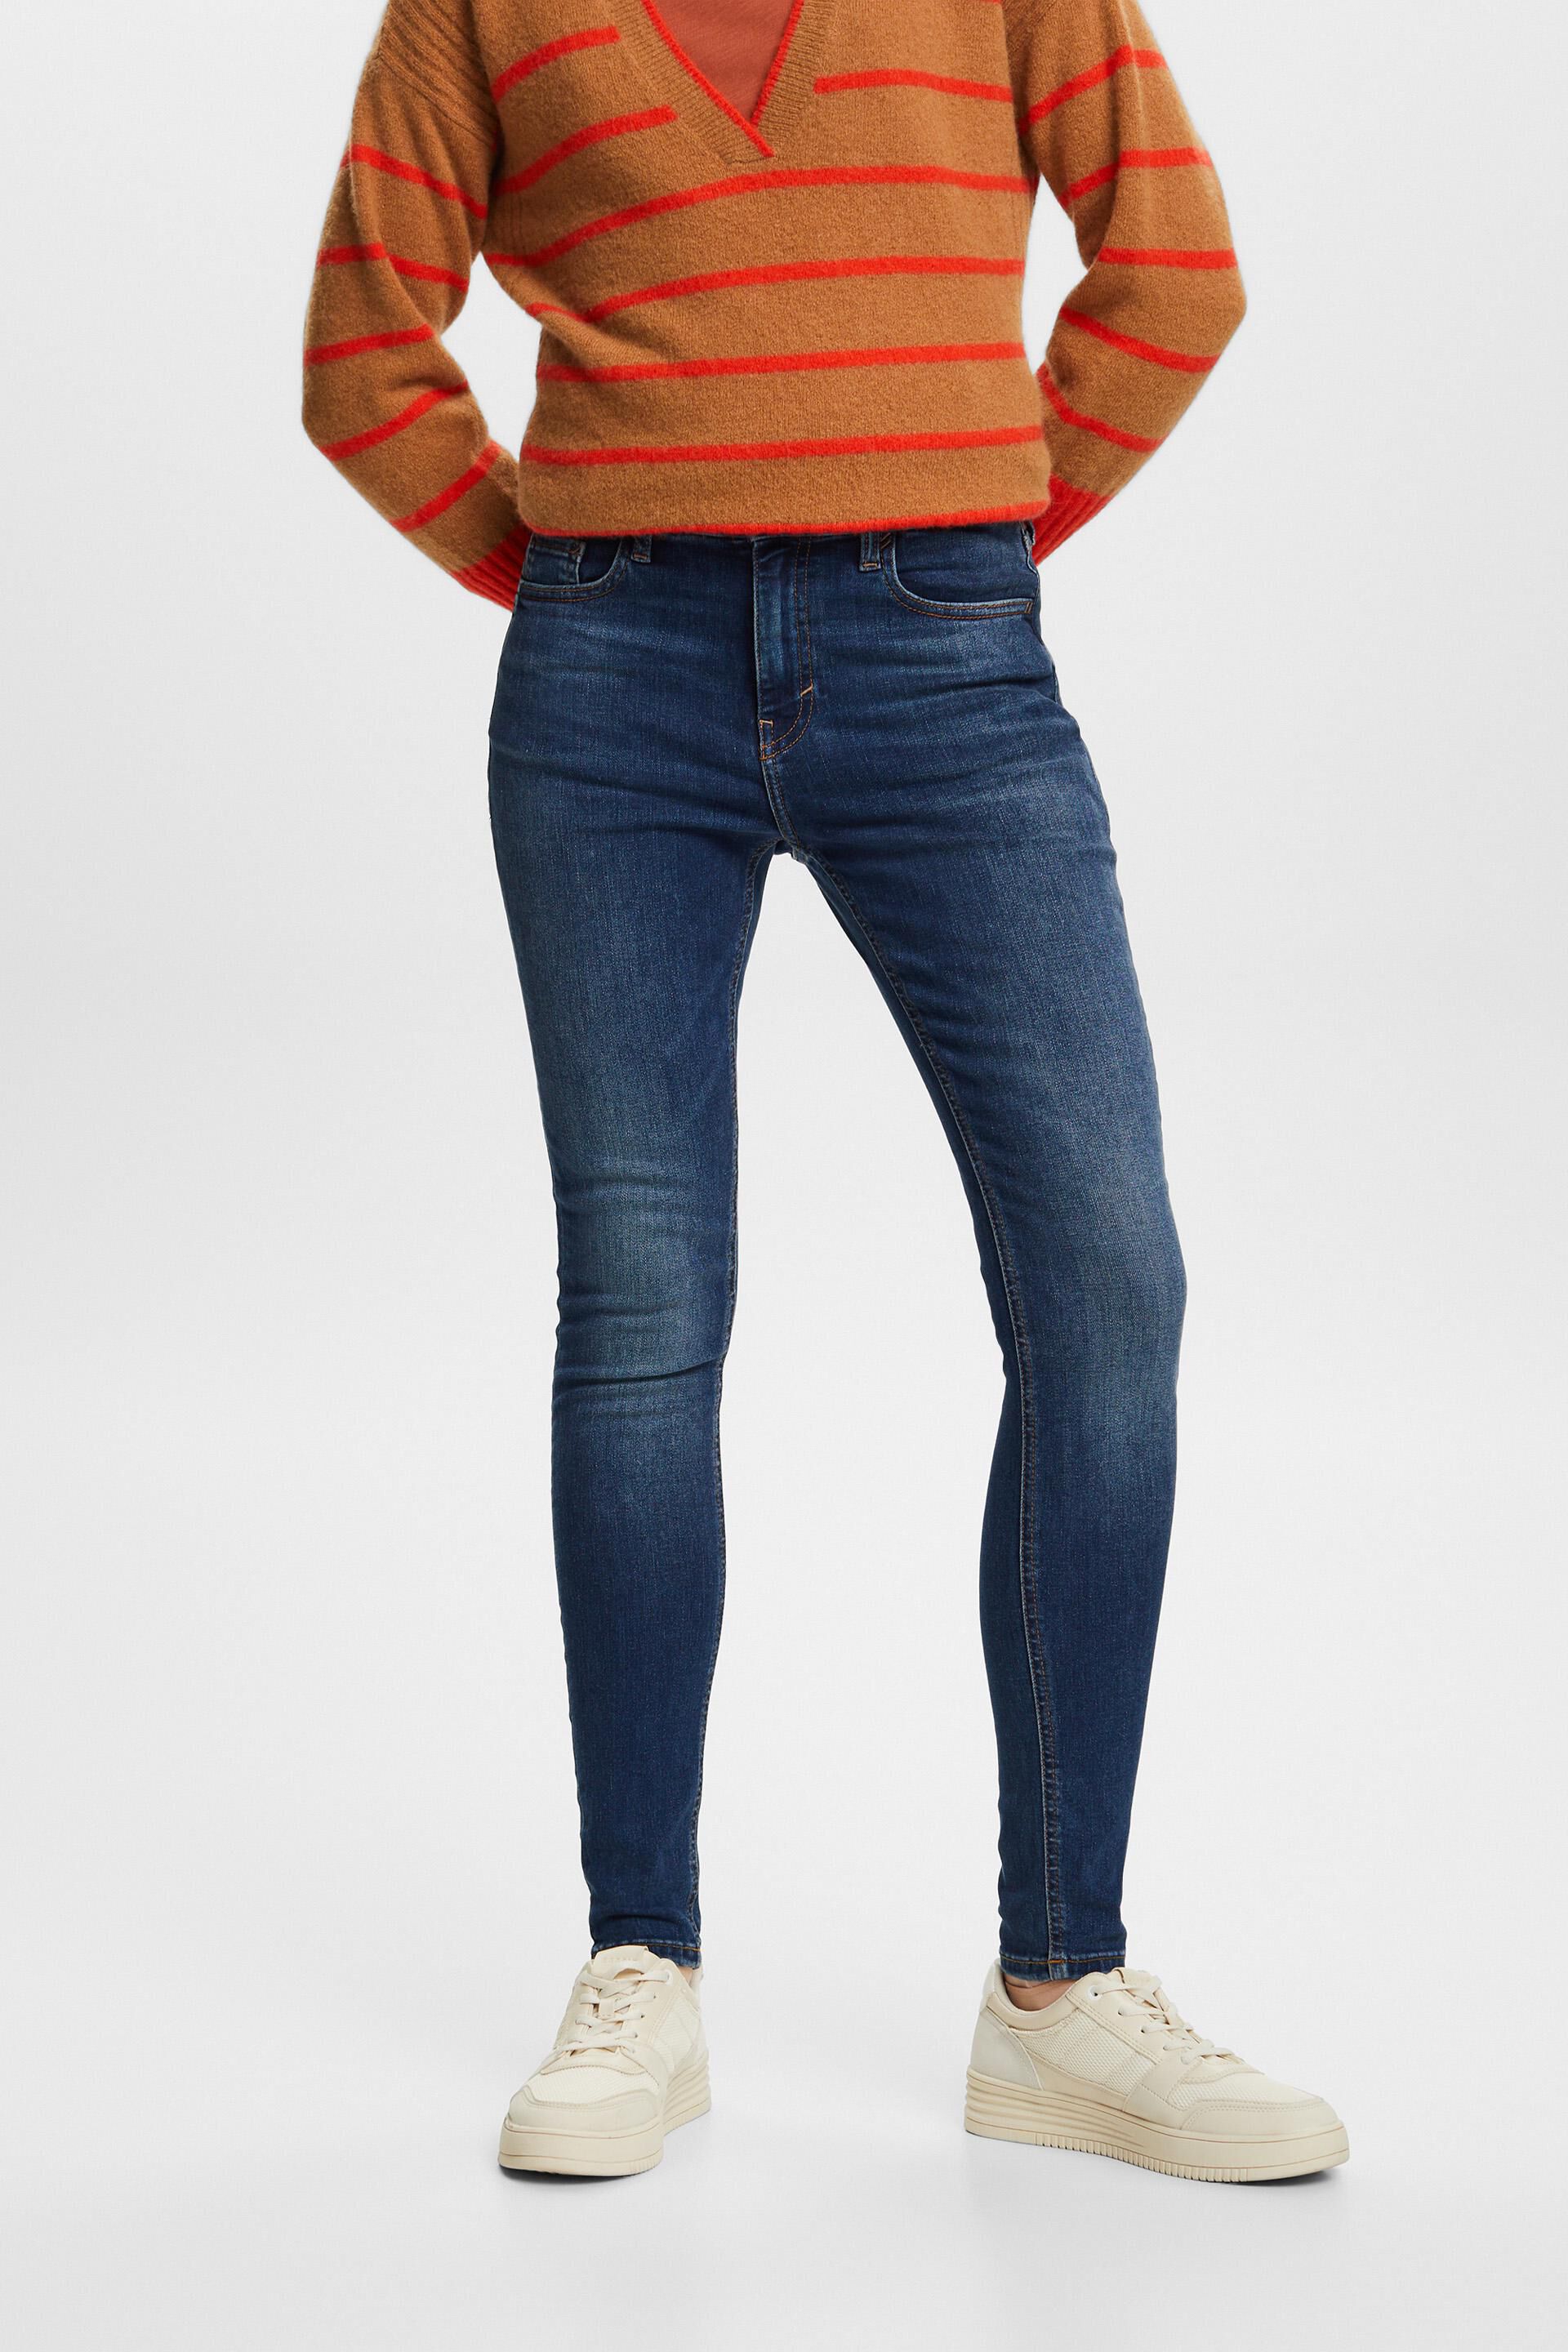 Esprit jeans Recycled: fit skinny stretch high-rise